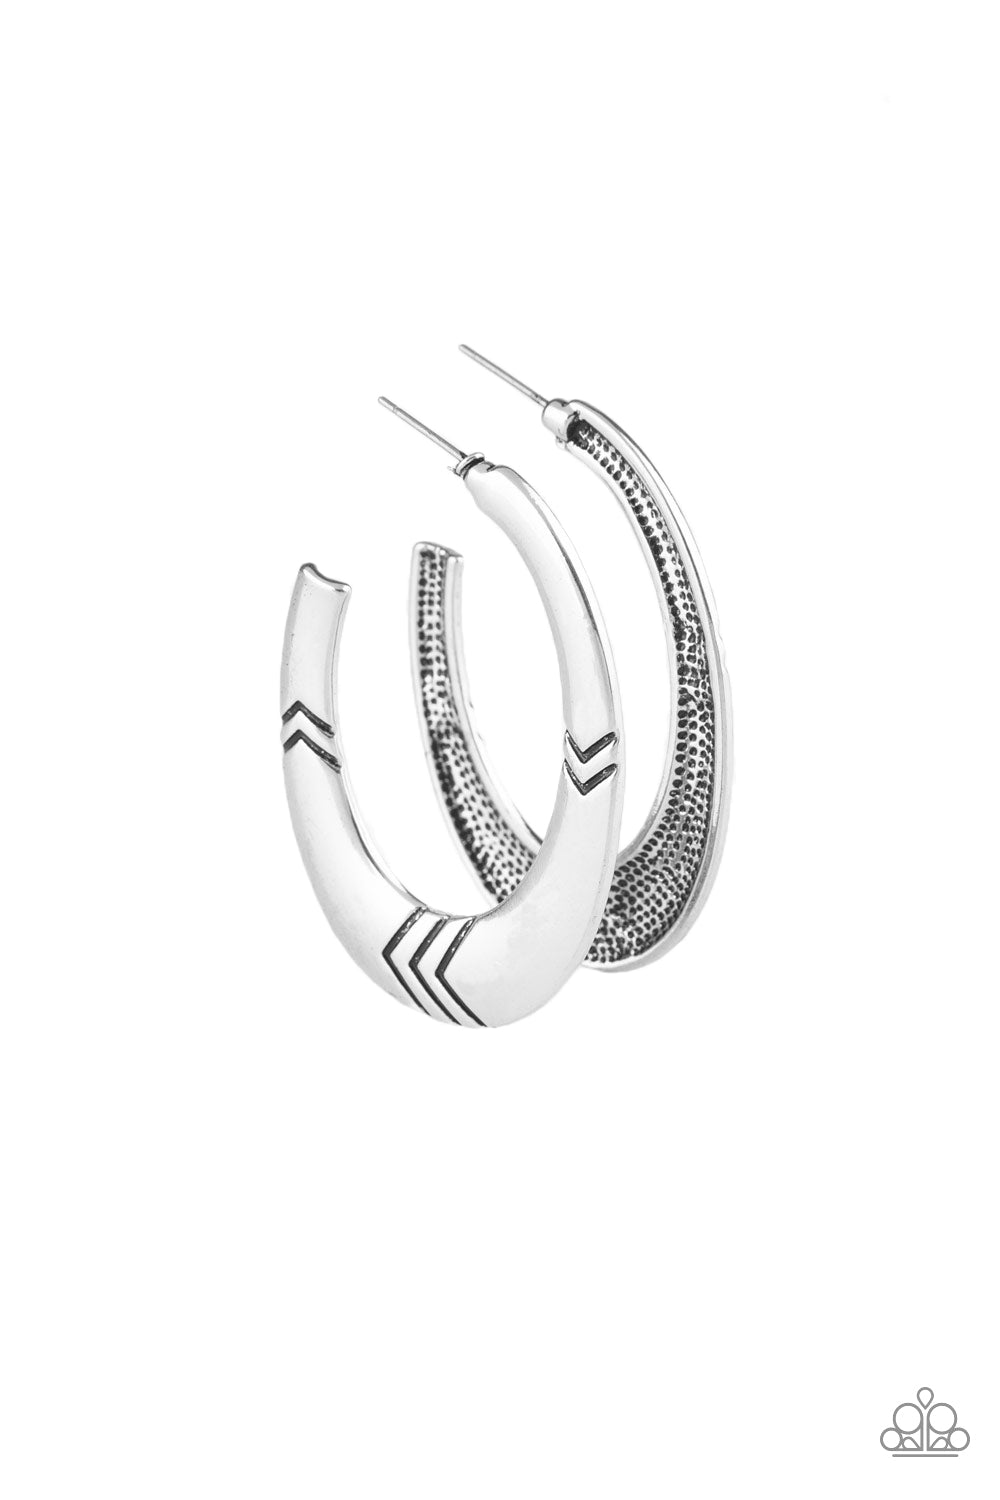 Paparazzi Accessories Tribe Pride - Silver Earrings - Lady T Accessories